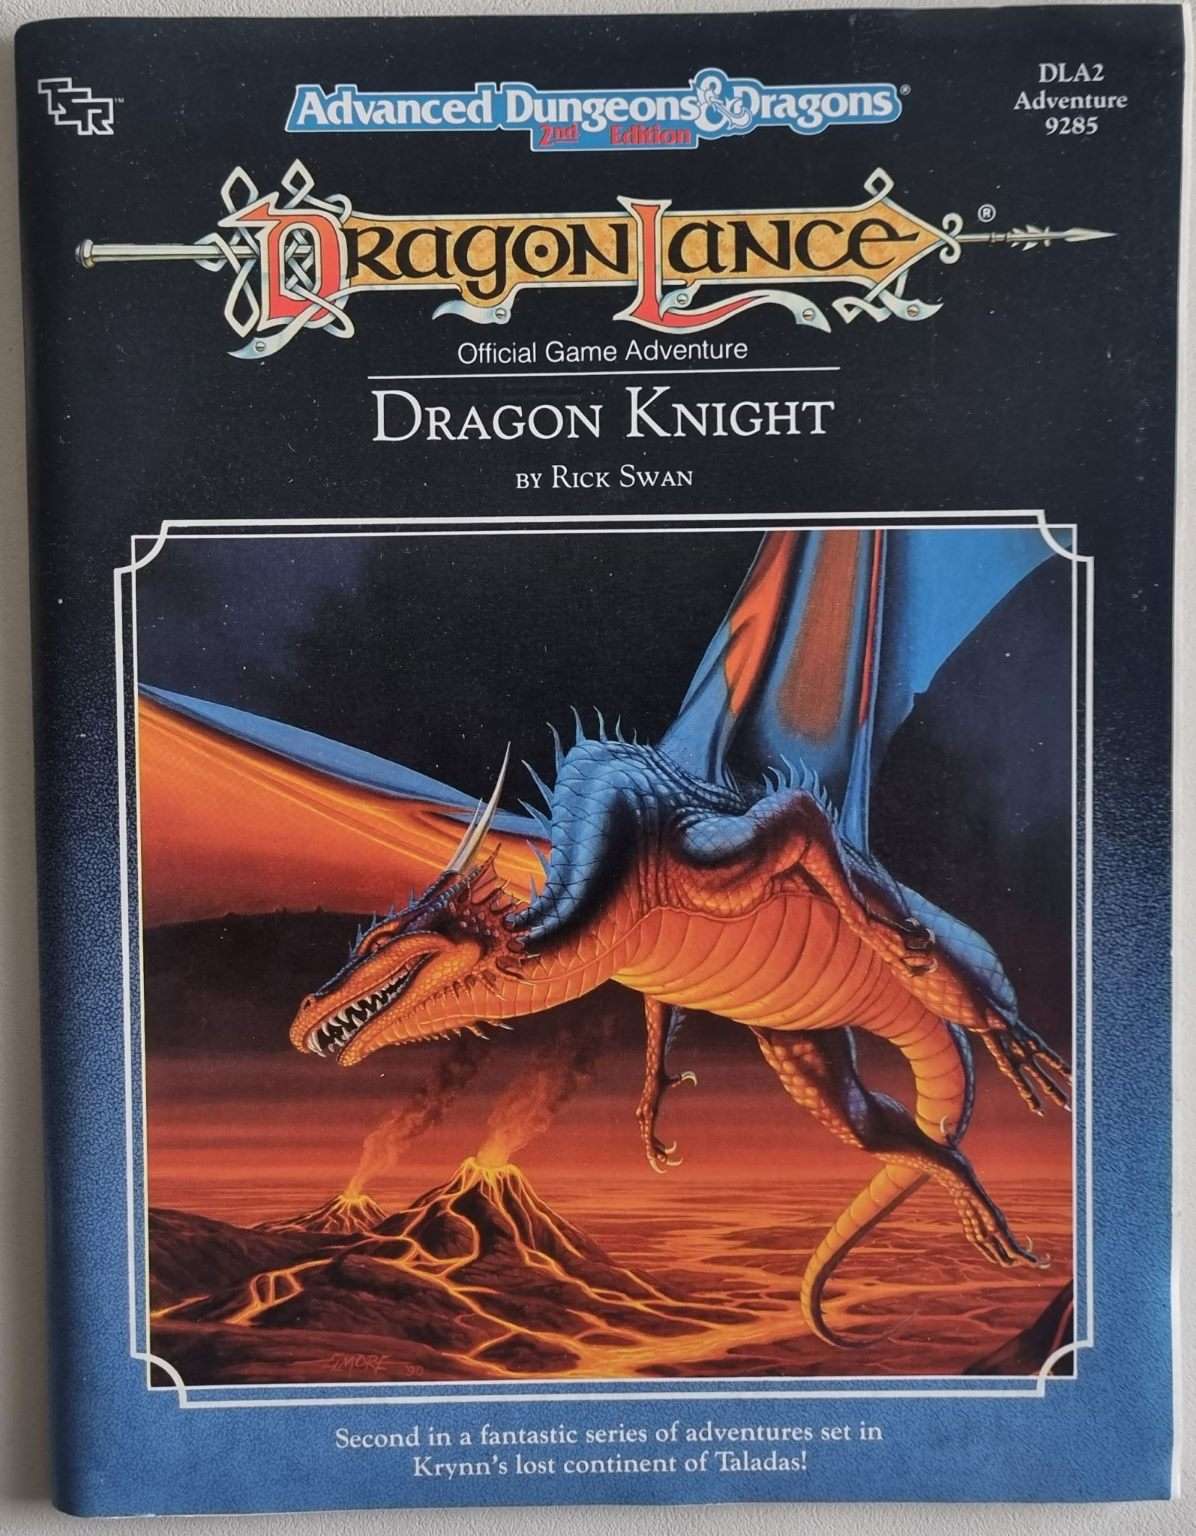 Advanced Dungeons and Dragons - Dragonlance - Dragon Knight  (DLA2 9285) Default Title